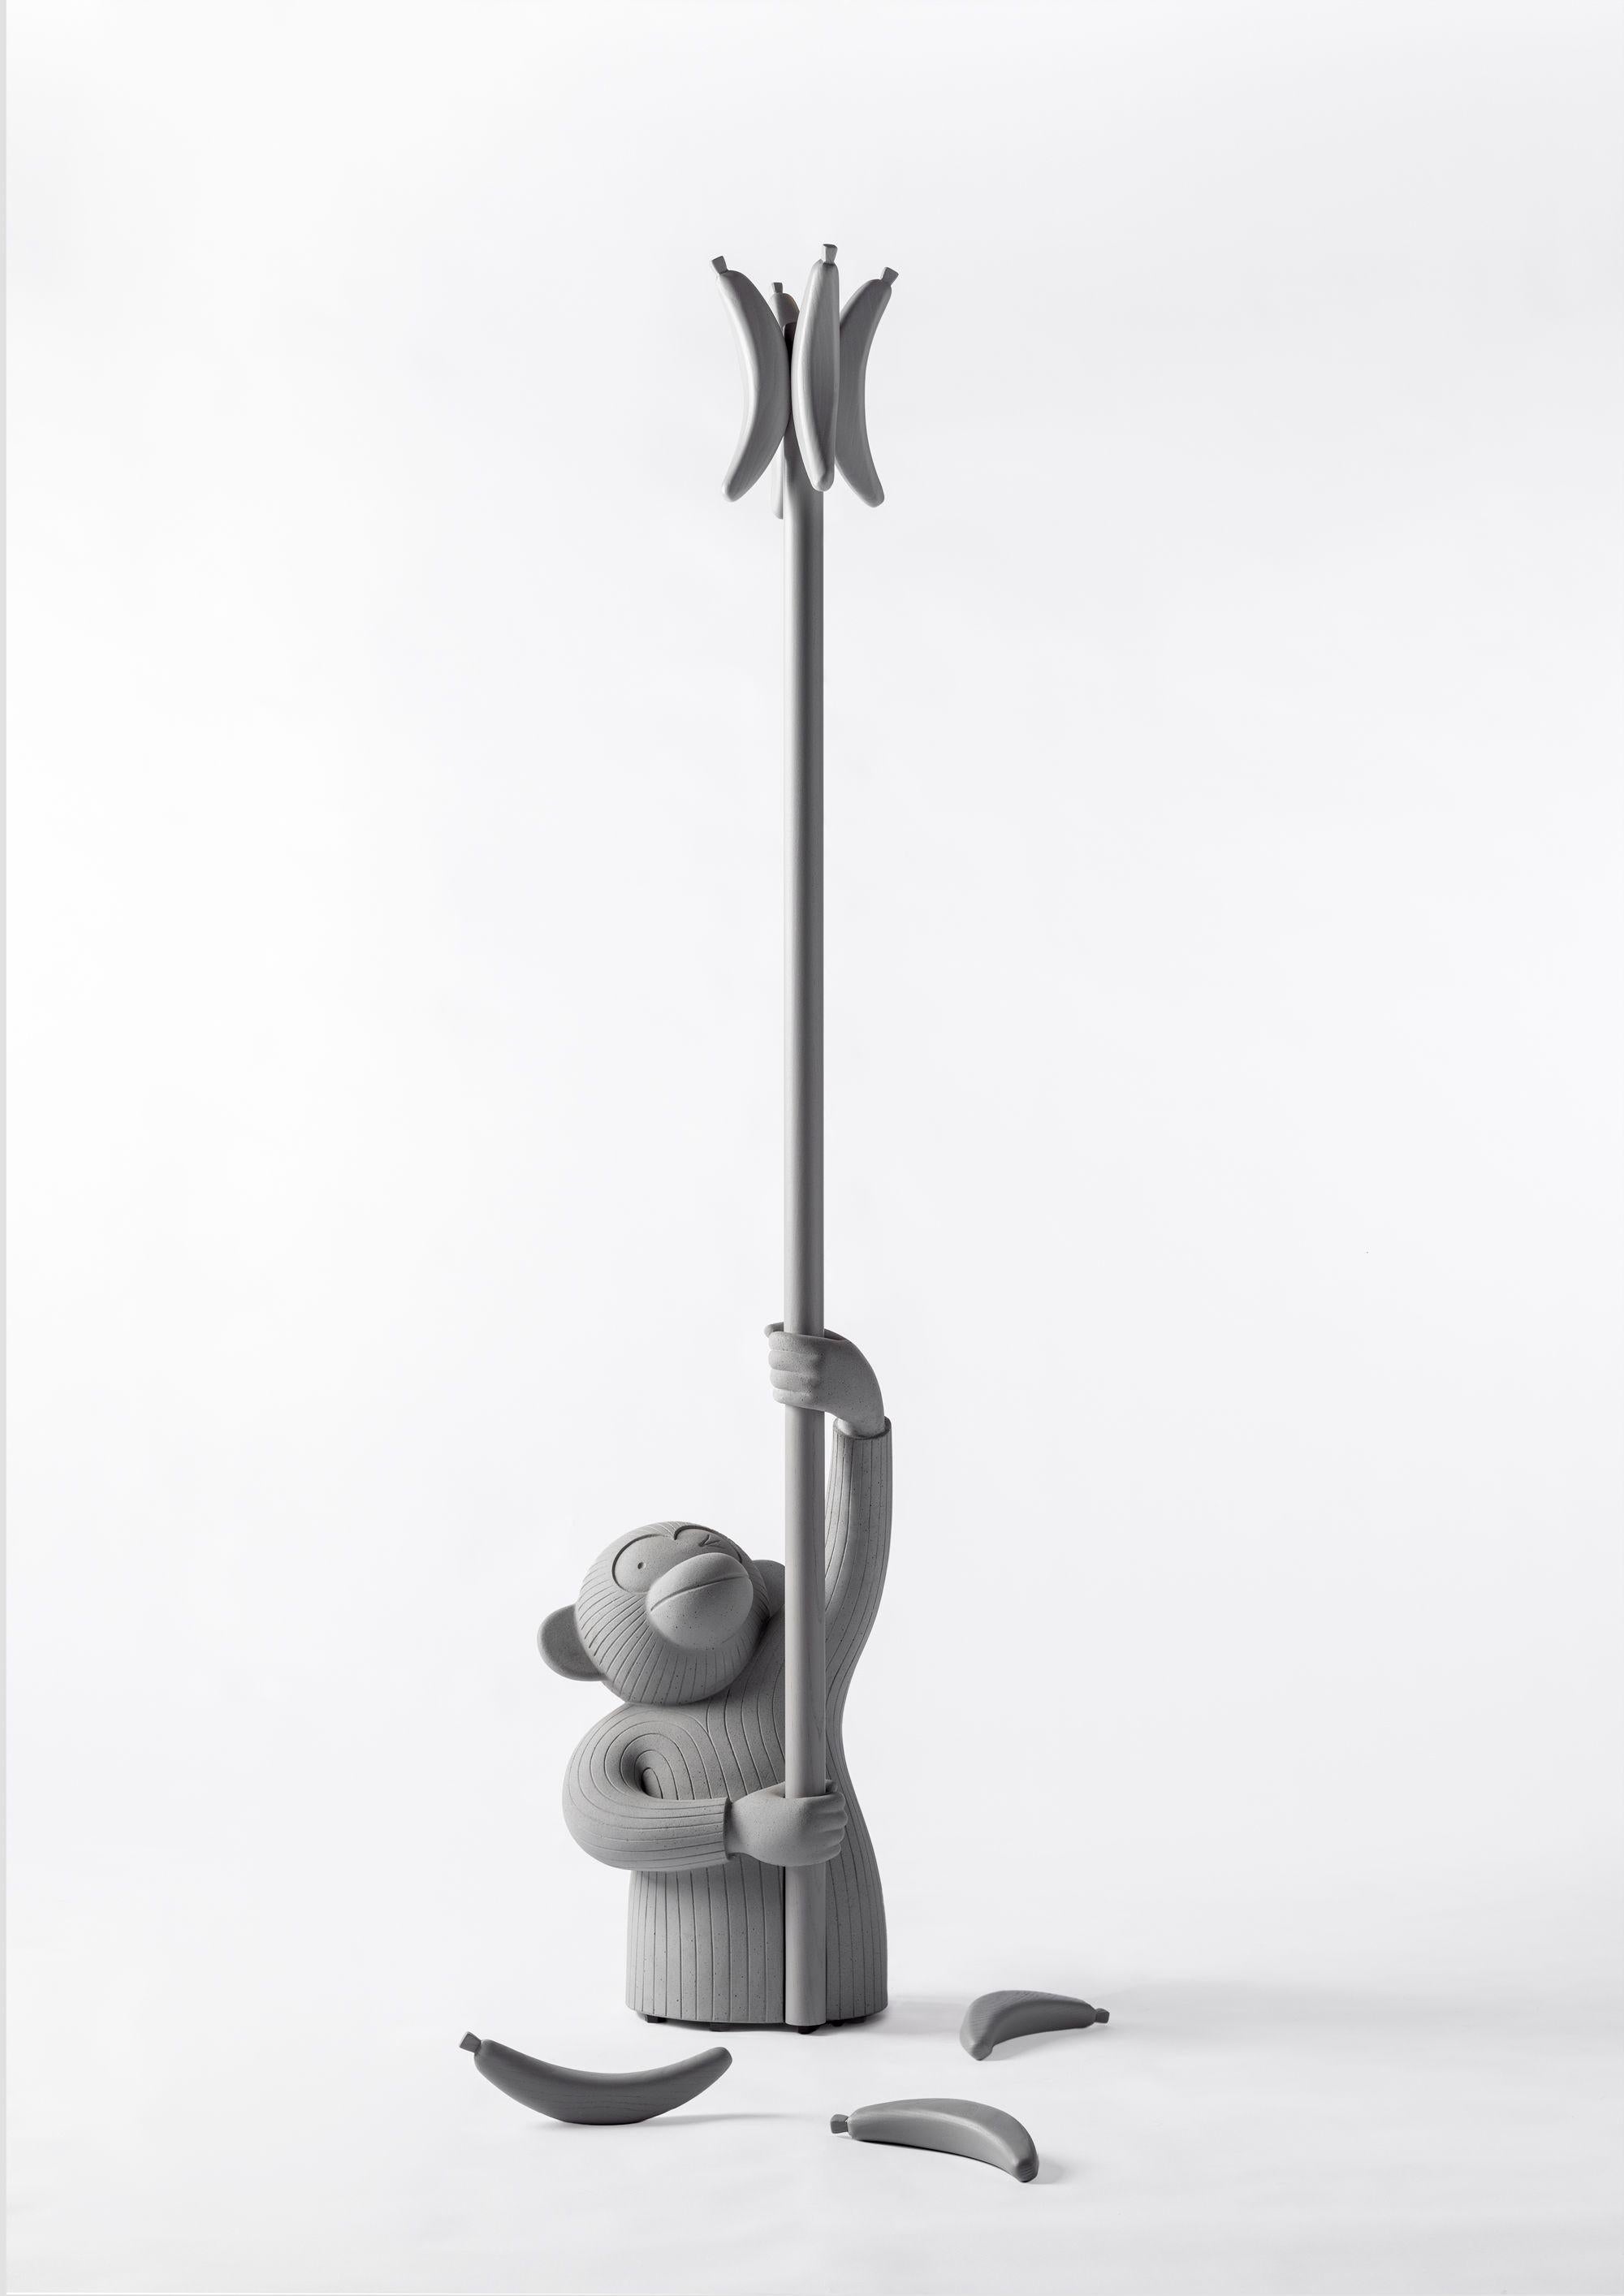 Monkey coat stand by Jaime Hayon
Dimensions: D31 x W39 x H167 cm 
Materials: Concrete

«We all want what can fall from above to be something good. For me, there’s nothing better than getting home to this smiling monkey to hang my jacket. It